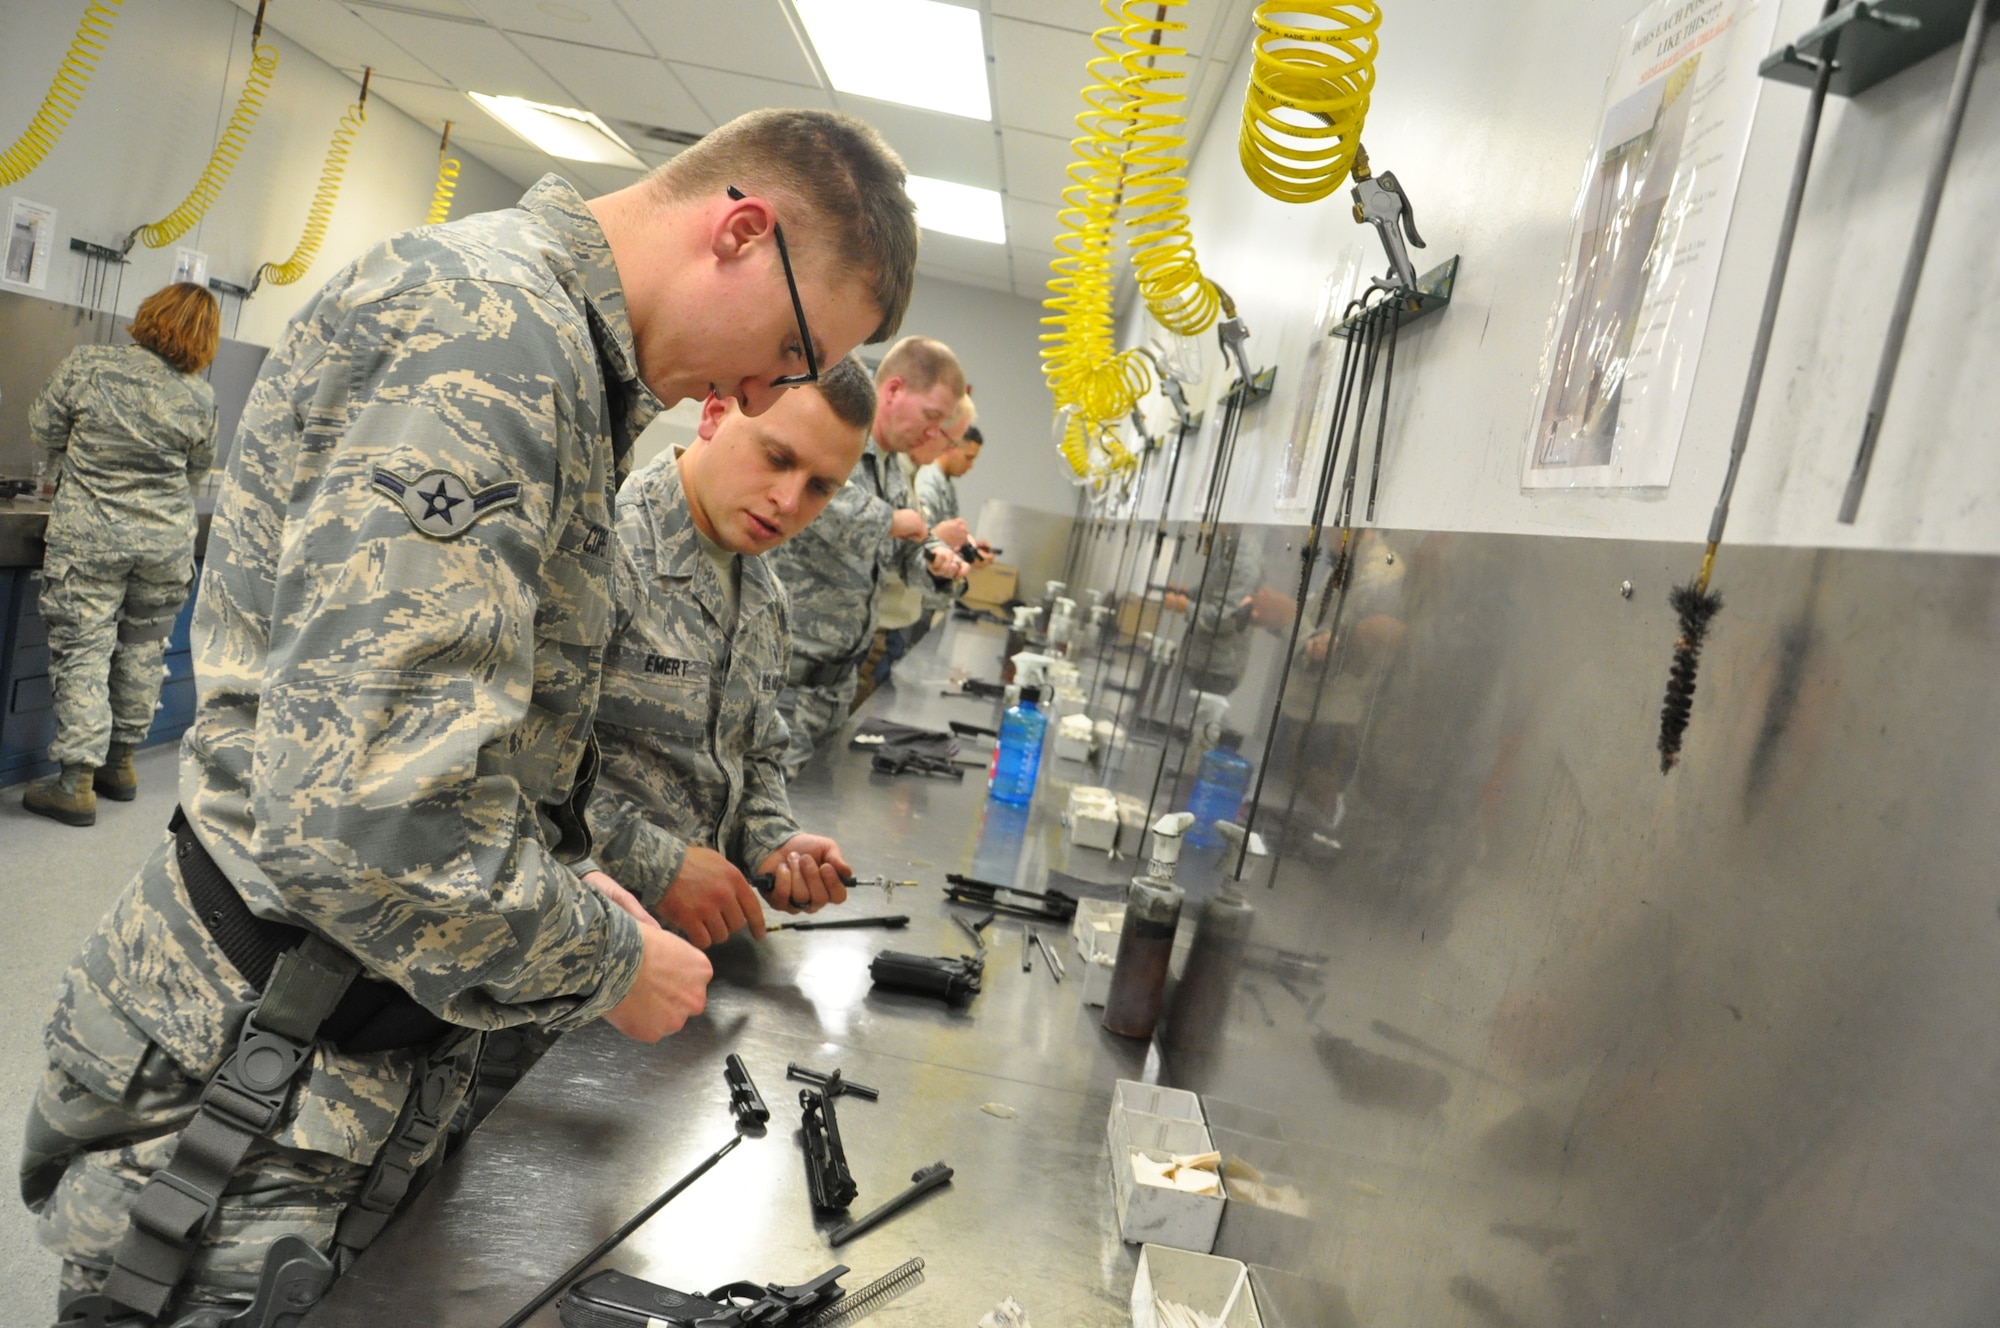 Airman Chris Cope, a Health Service Management apprentice from the 88th Medical Group, works on cleaning his M9 Beretta after completing the M9 qualification course. Students are taught by CATM instructors how to properly disassemble their weapon, clean it properly and reassemble it to proper working condition for the next student’s use. (U.S. Air Force photo/Bryan Ripple.)